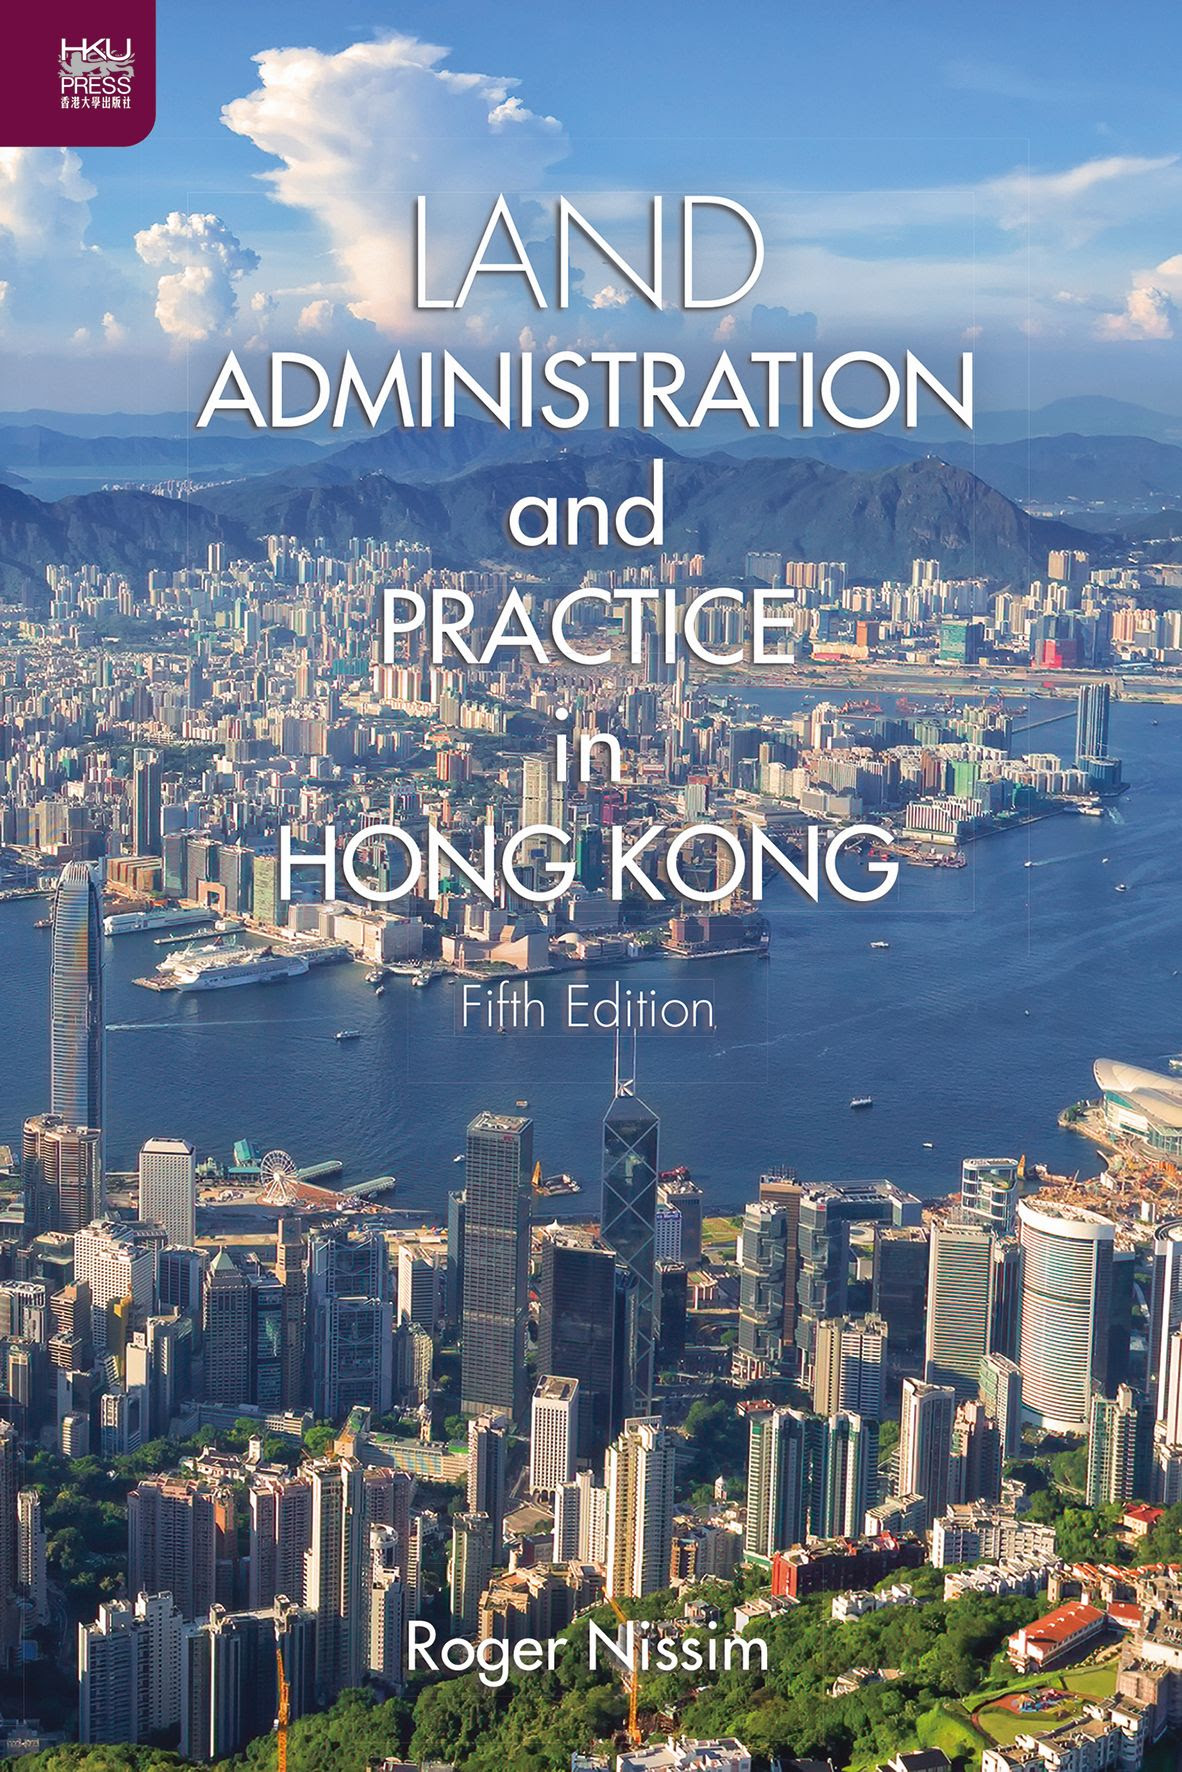 Land Administration and Practice in Hong Kong in Kindle/PDF/EPUB